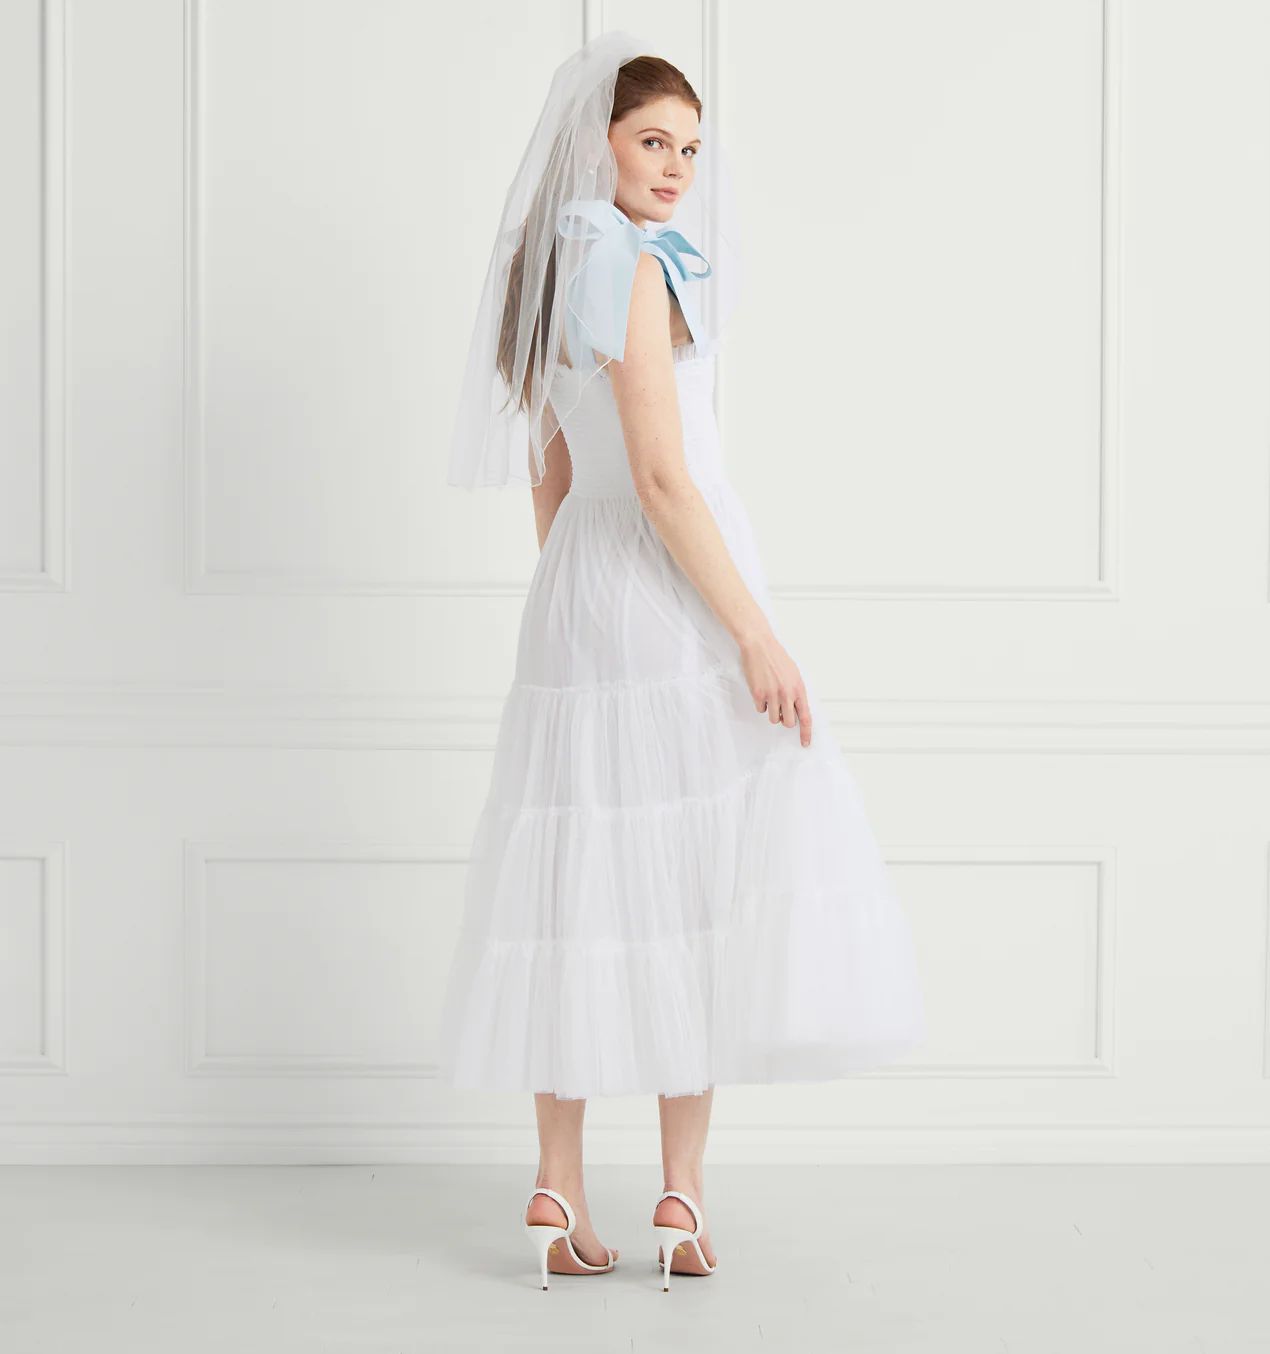 The Tulle Ribbon Ellie Nap Dress - White Tulle with Blue Ribbon | Hill House Home